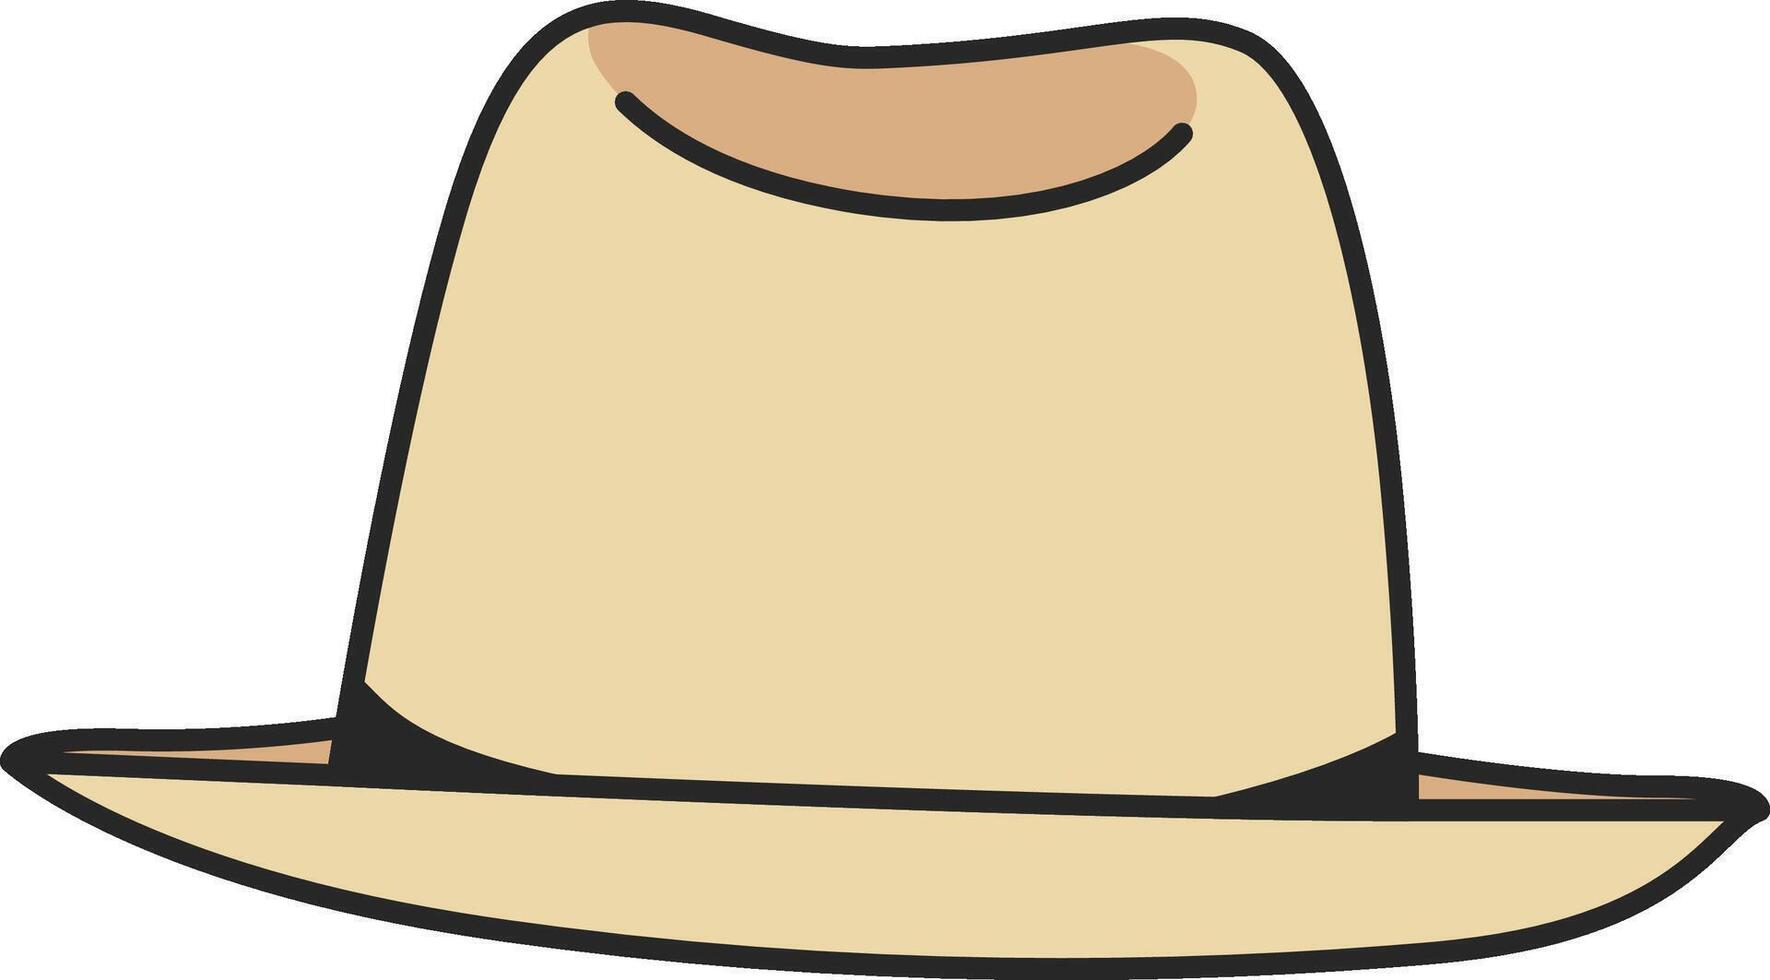 Illustration of a hat on a white background. Vector illustration.